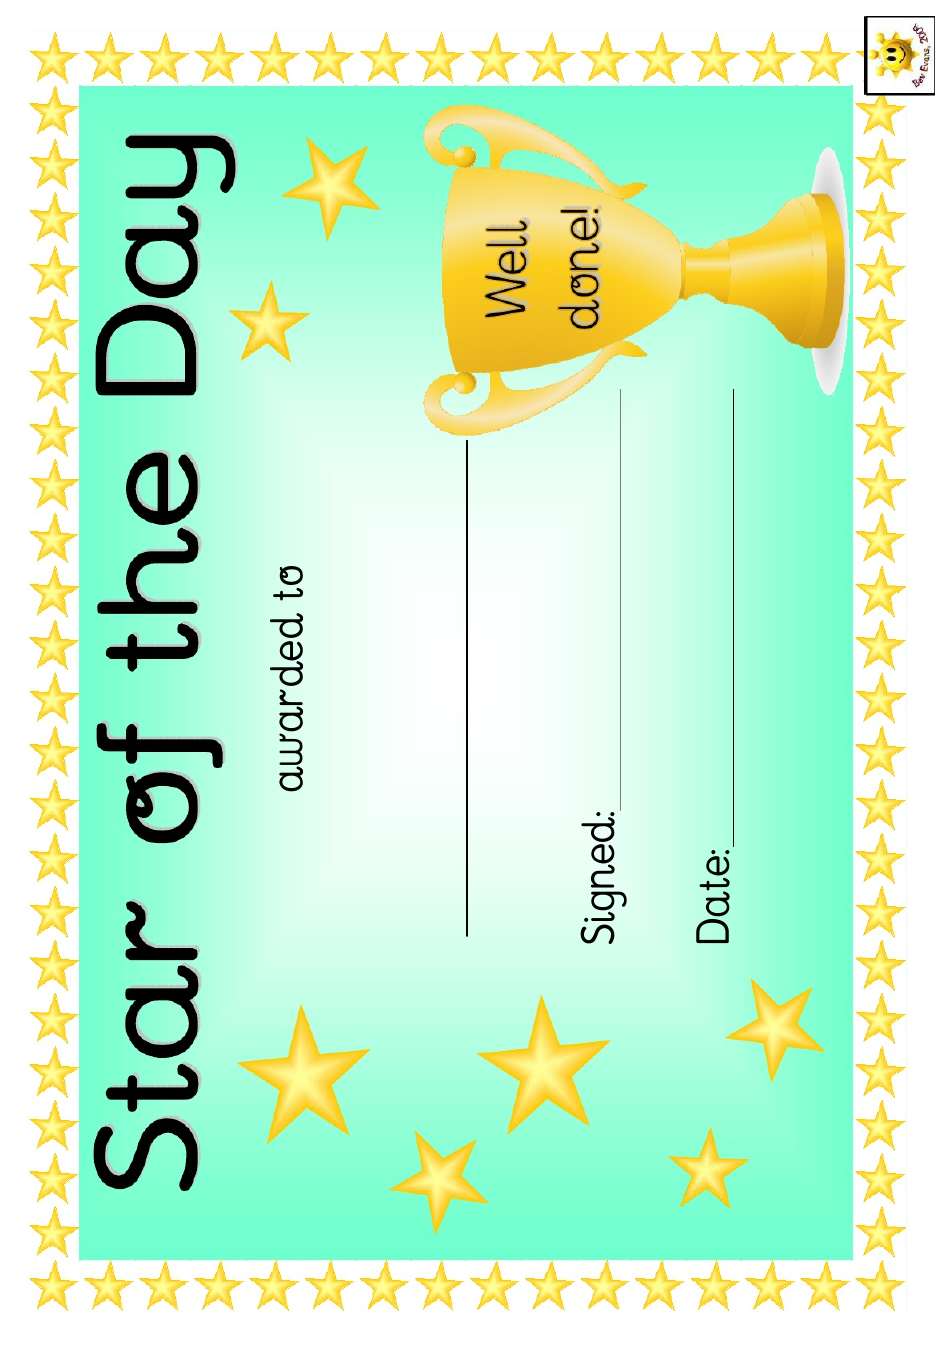 Star of the Day Award Certificate Template - Green, Page 1